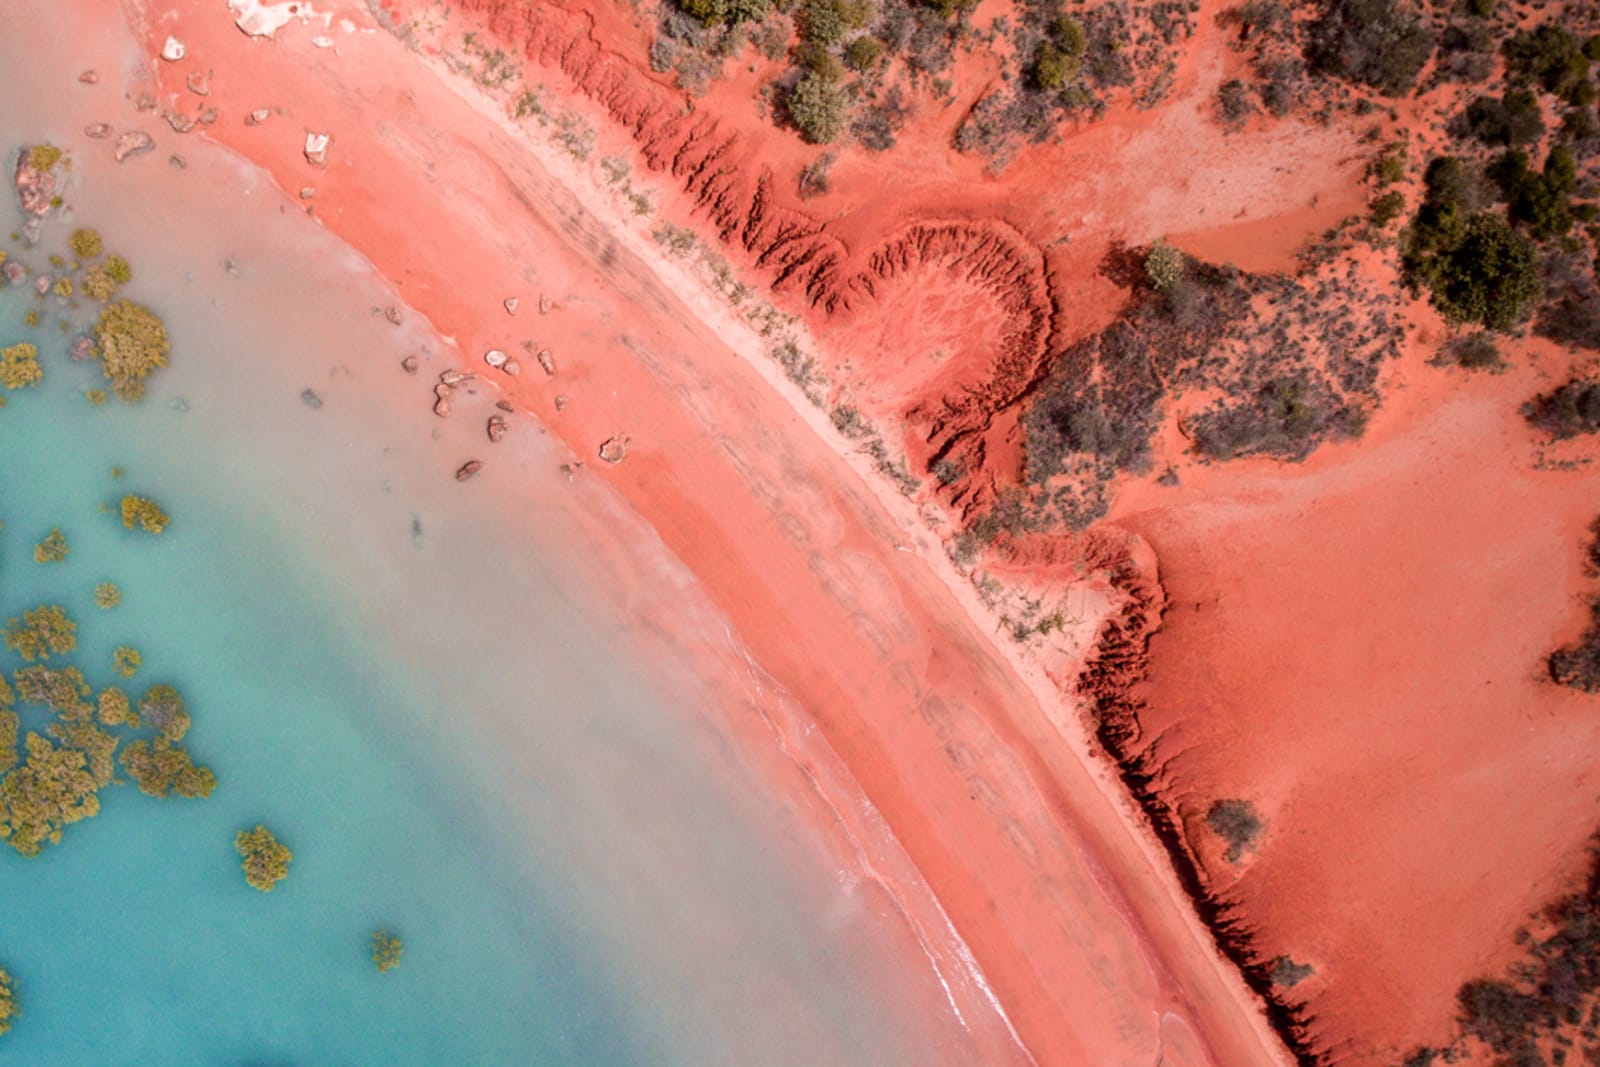 The Kimberley is home to some of Australia's most striking landscapes